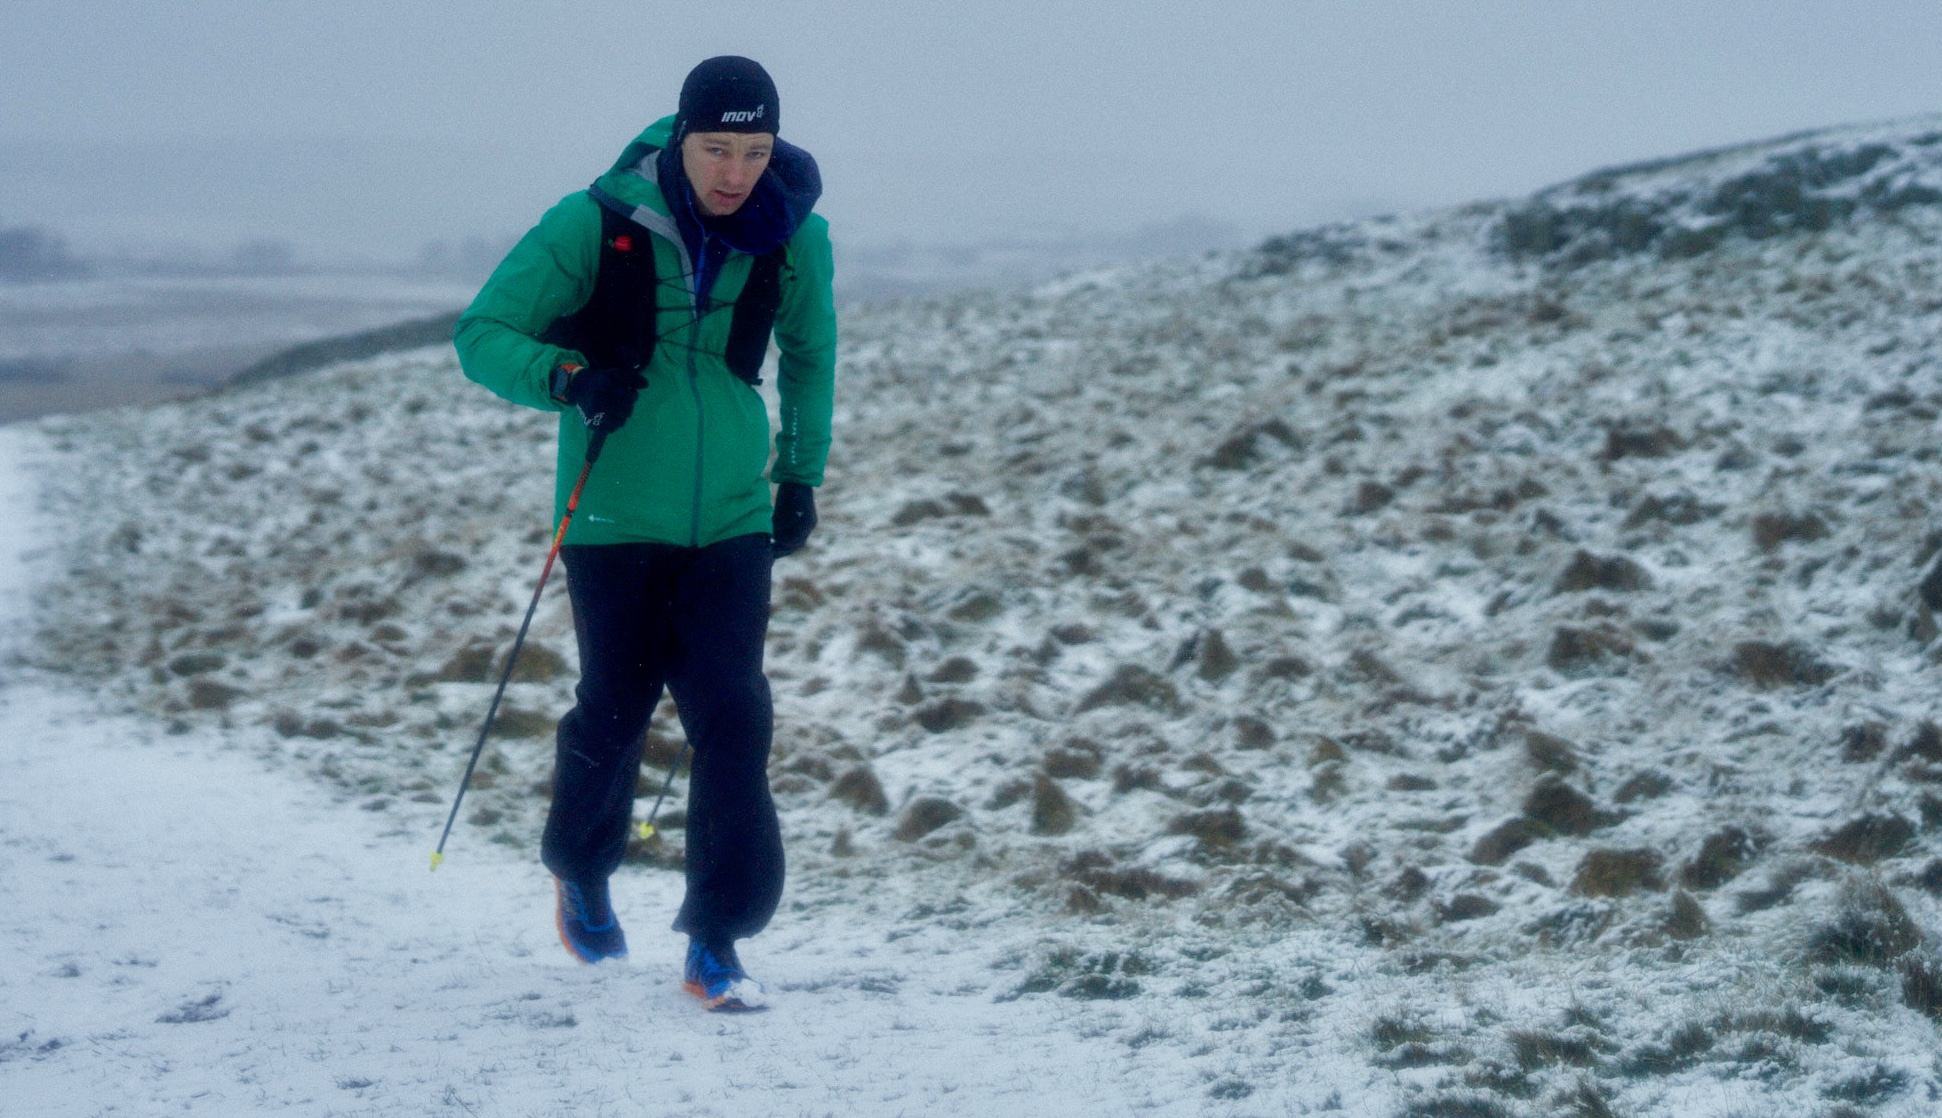 Jack Scott at Spine Race in the snowy Pennine Way